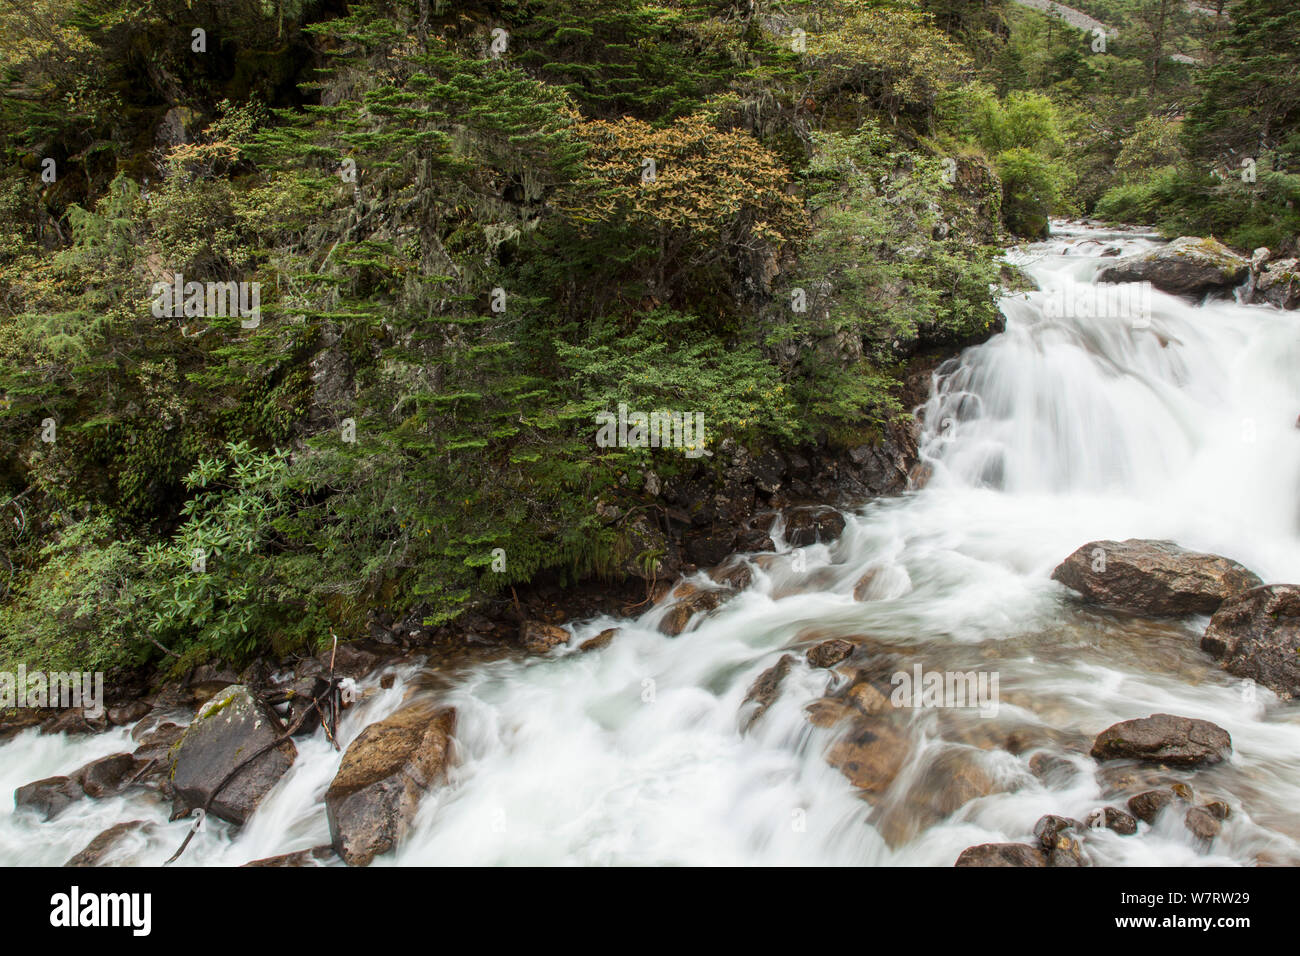 River lined with Rhododendron (Rhododendron) trees, flowing through Gonggai Shan Nature Reserve, Kangding / Dartsedo, Tibet, China, August. Stock Photo